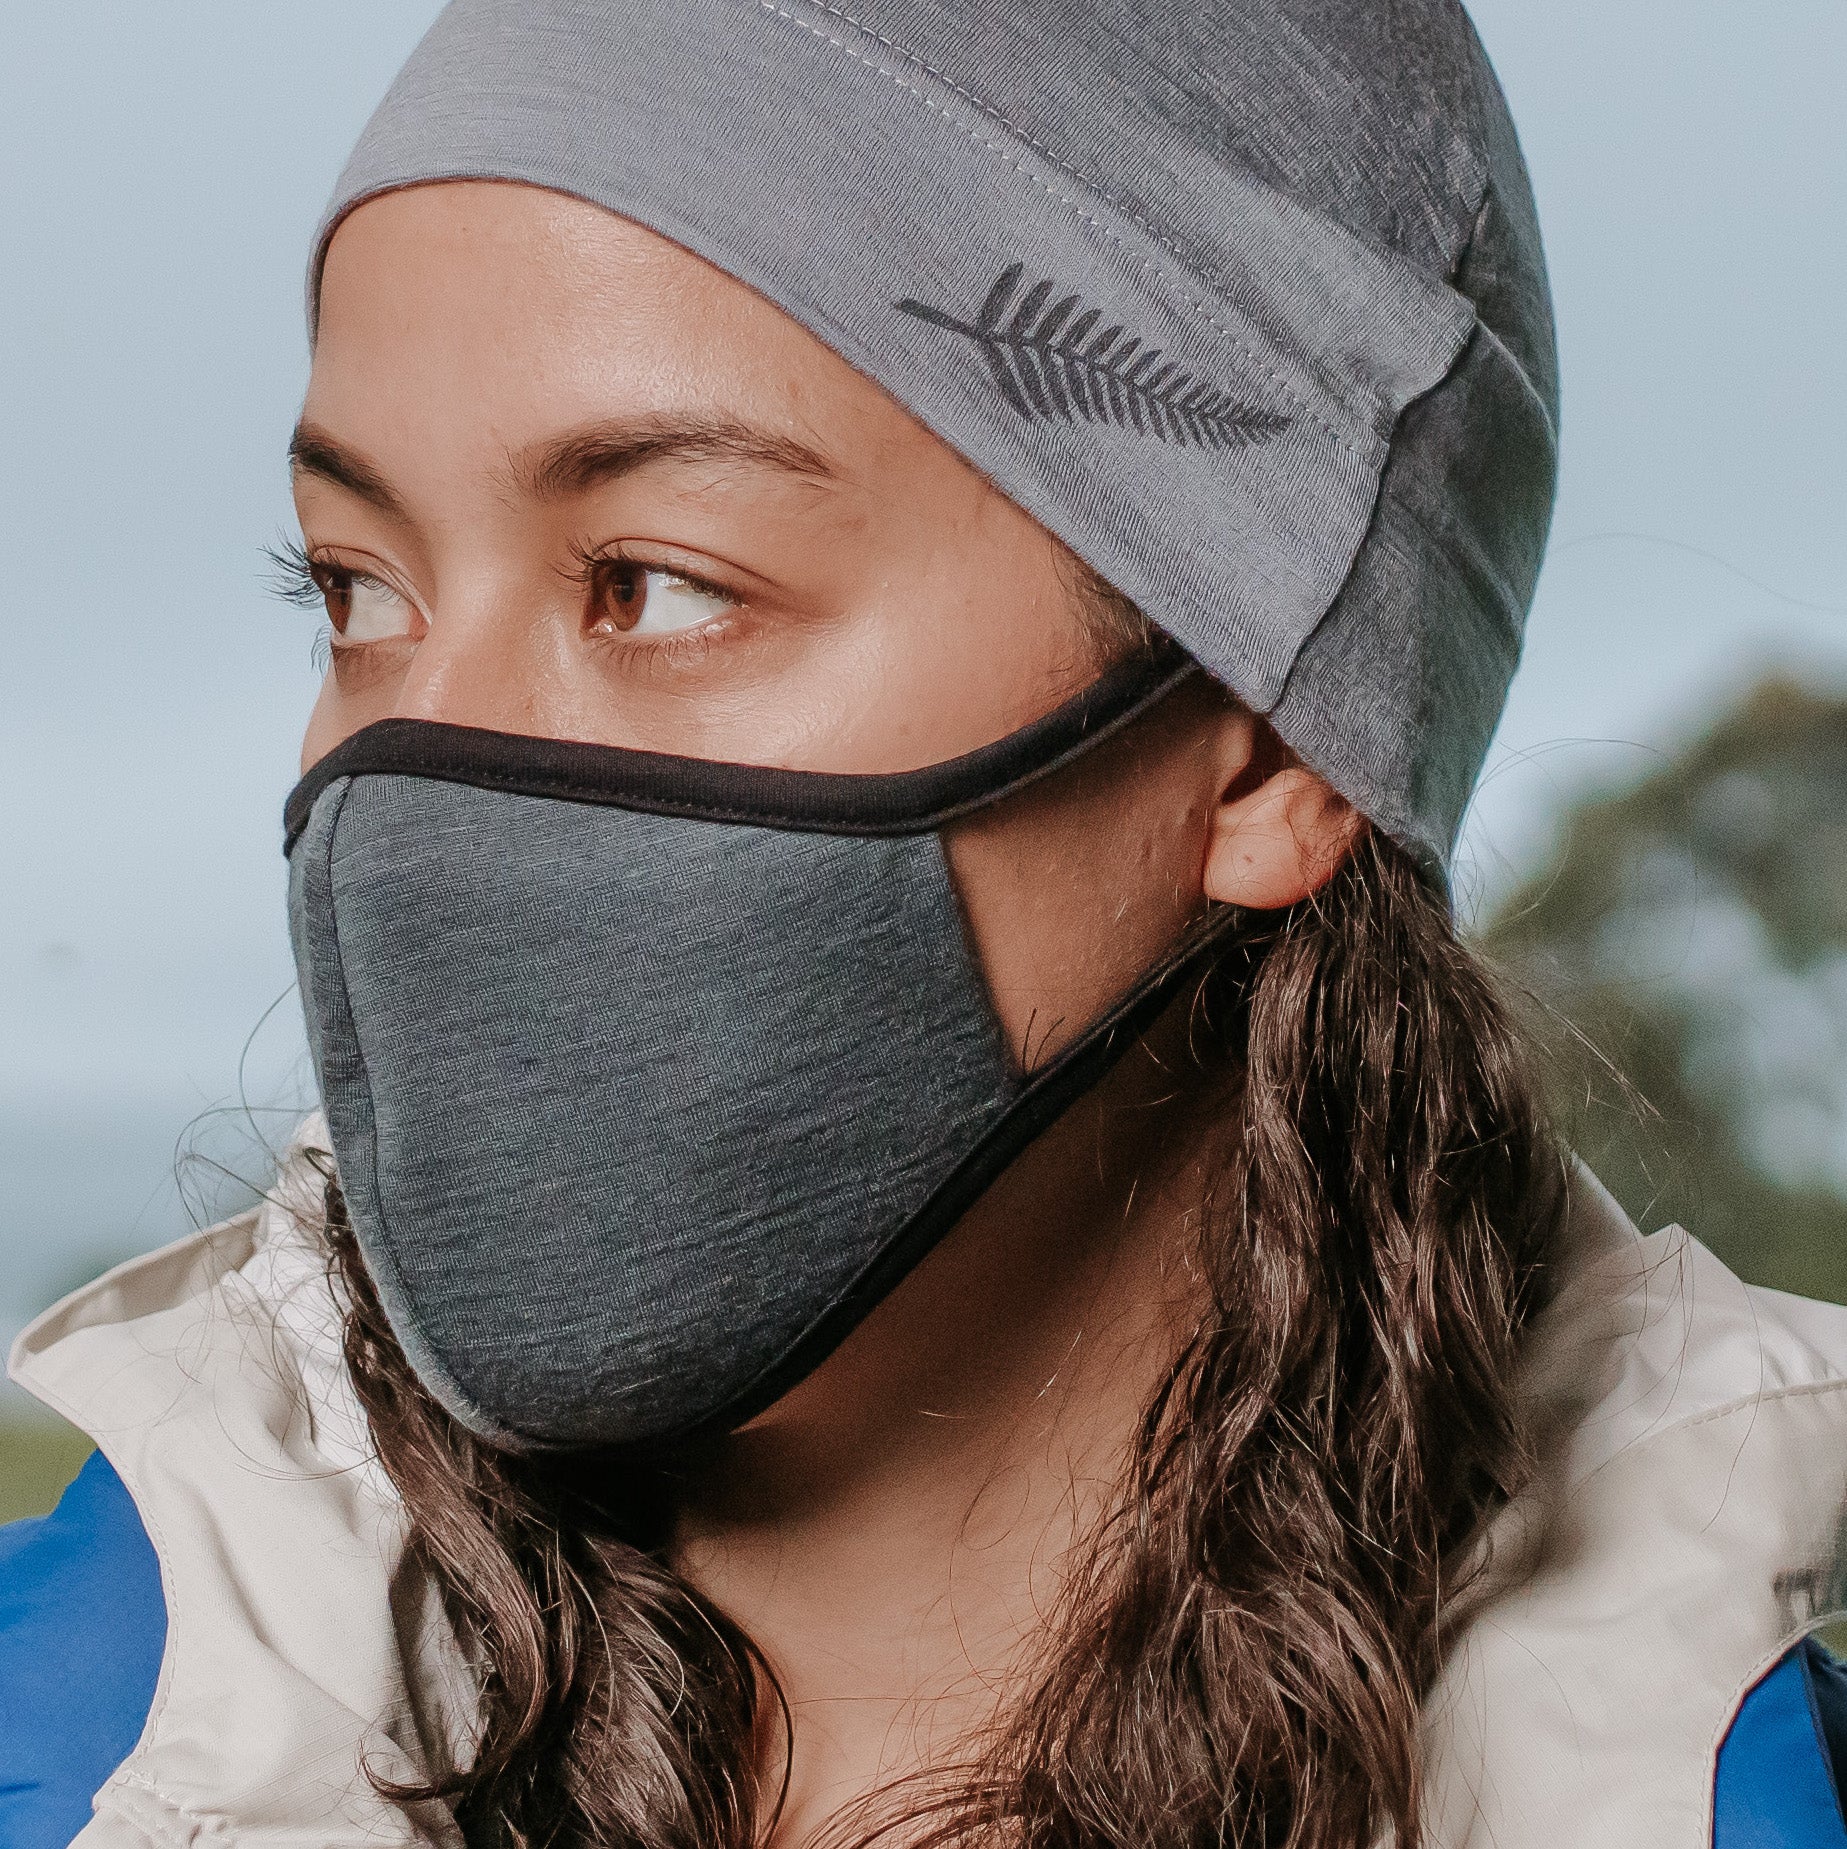 Merino Face Mask. Made in New Zealand